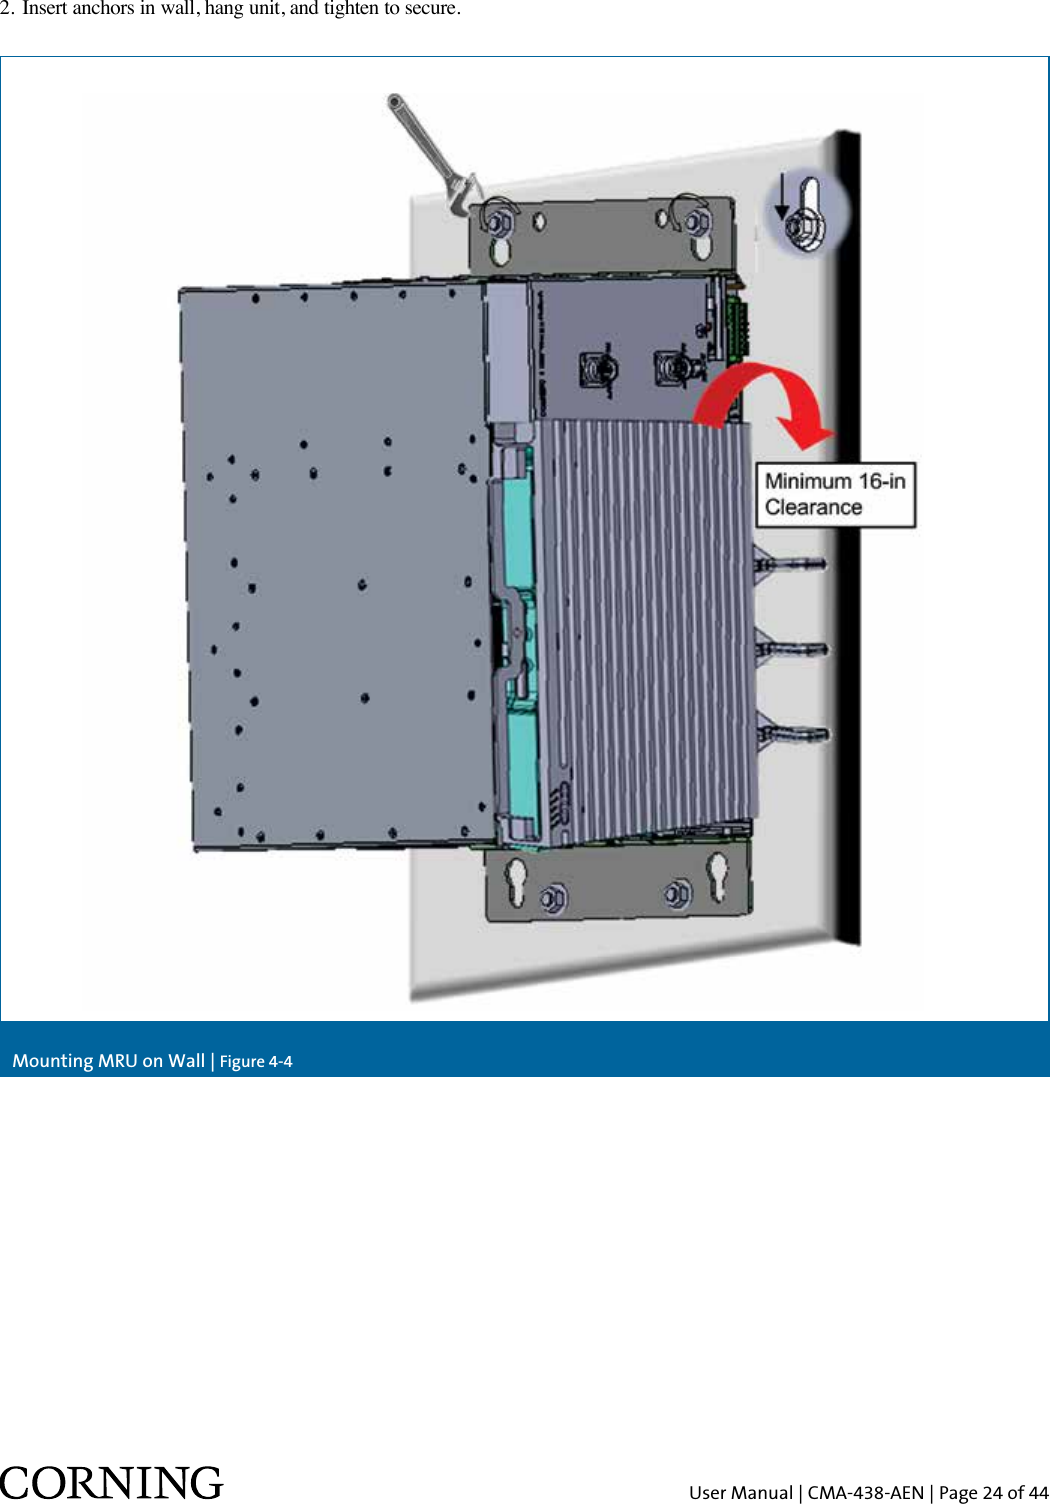 User Manual | CMA-438-AEN | Page 24 of 44Mounting MRU on Wall | Figure 4-42.  Insert anchors in wall, hang unit, and tighten to secure.